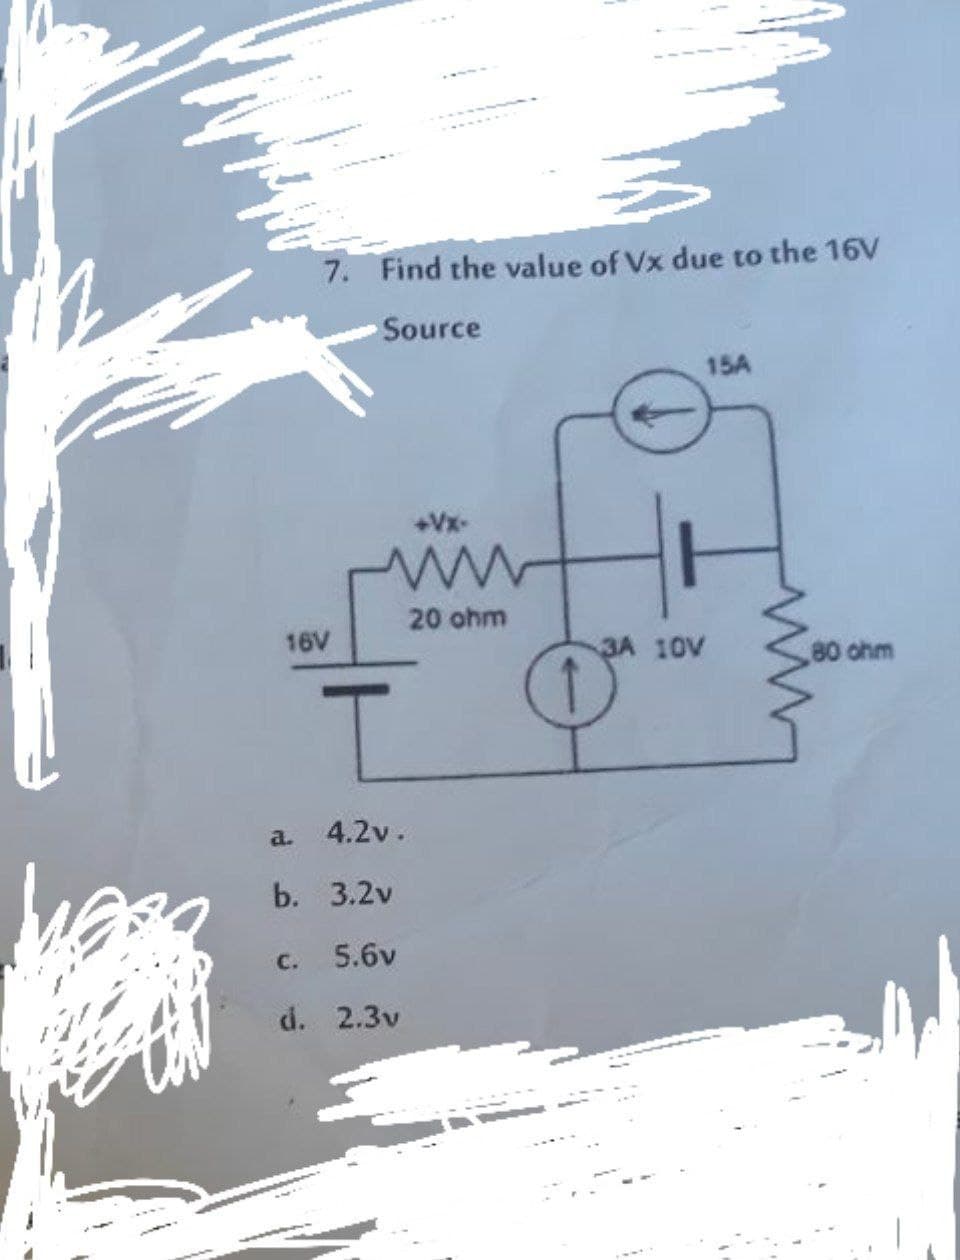 7. Find the value of Vx due to the 16V
Source
15A
+Vx-
20 ohm
16V
3A 10V
80 ohm
a.
4.2v.
b. 3.2v
с.
5.6v
d. 2.3v
